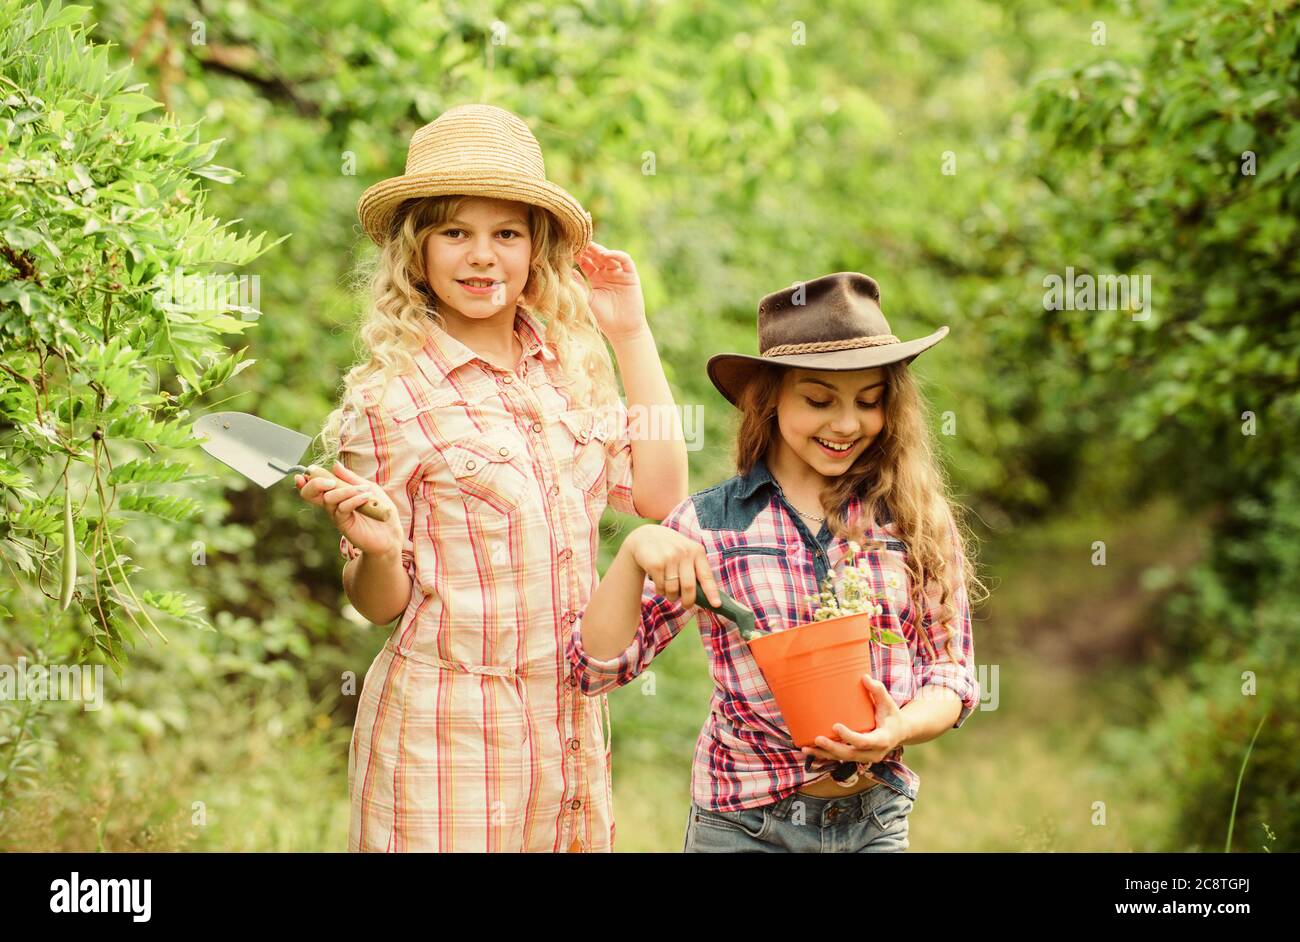 The best job ever. happy farming. spring country side. earth day. summer family farm. protect nature. Rich harvest. children work using gardening tool. small girls farmer in village. Beauty of nature. Stock Photo